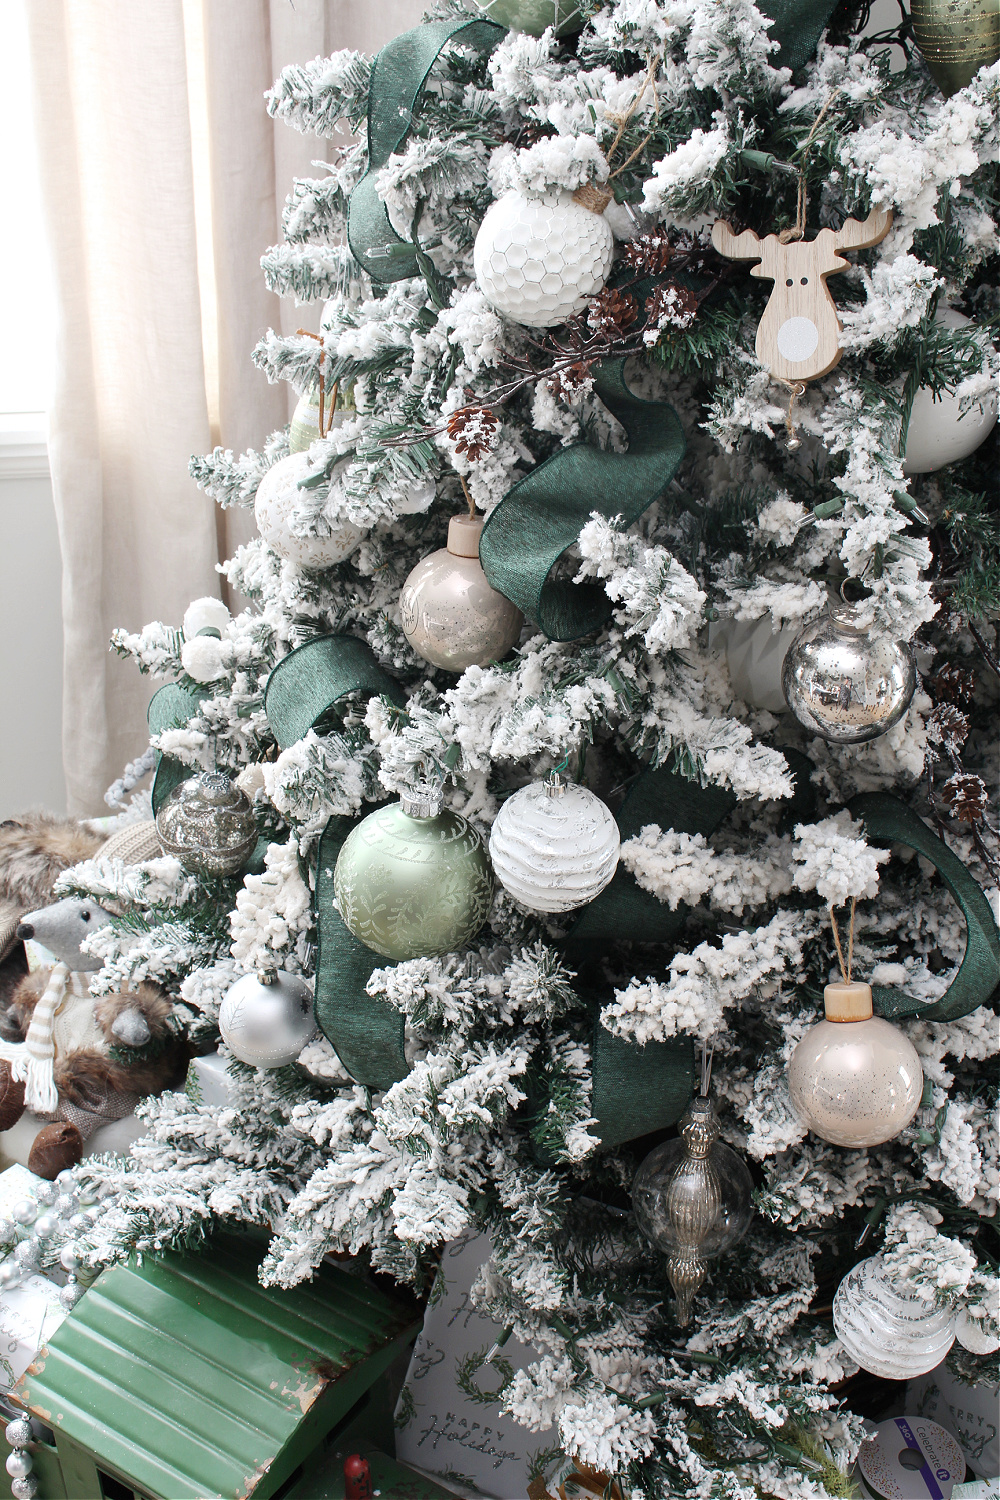 Flocked Christmas decorated with white, greens, and metallics.